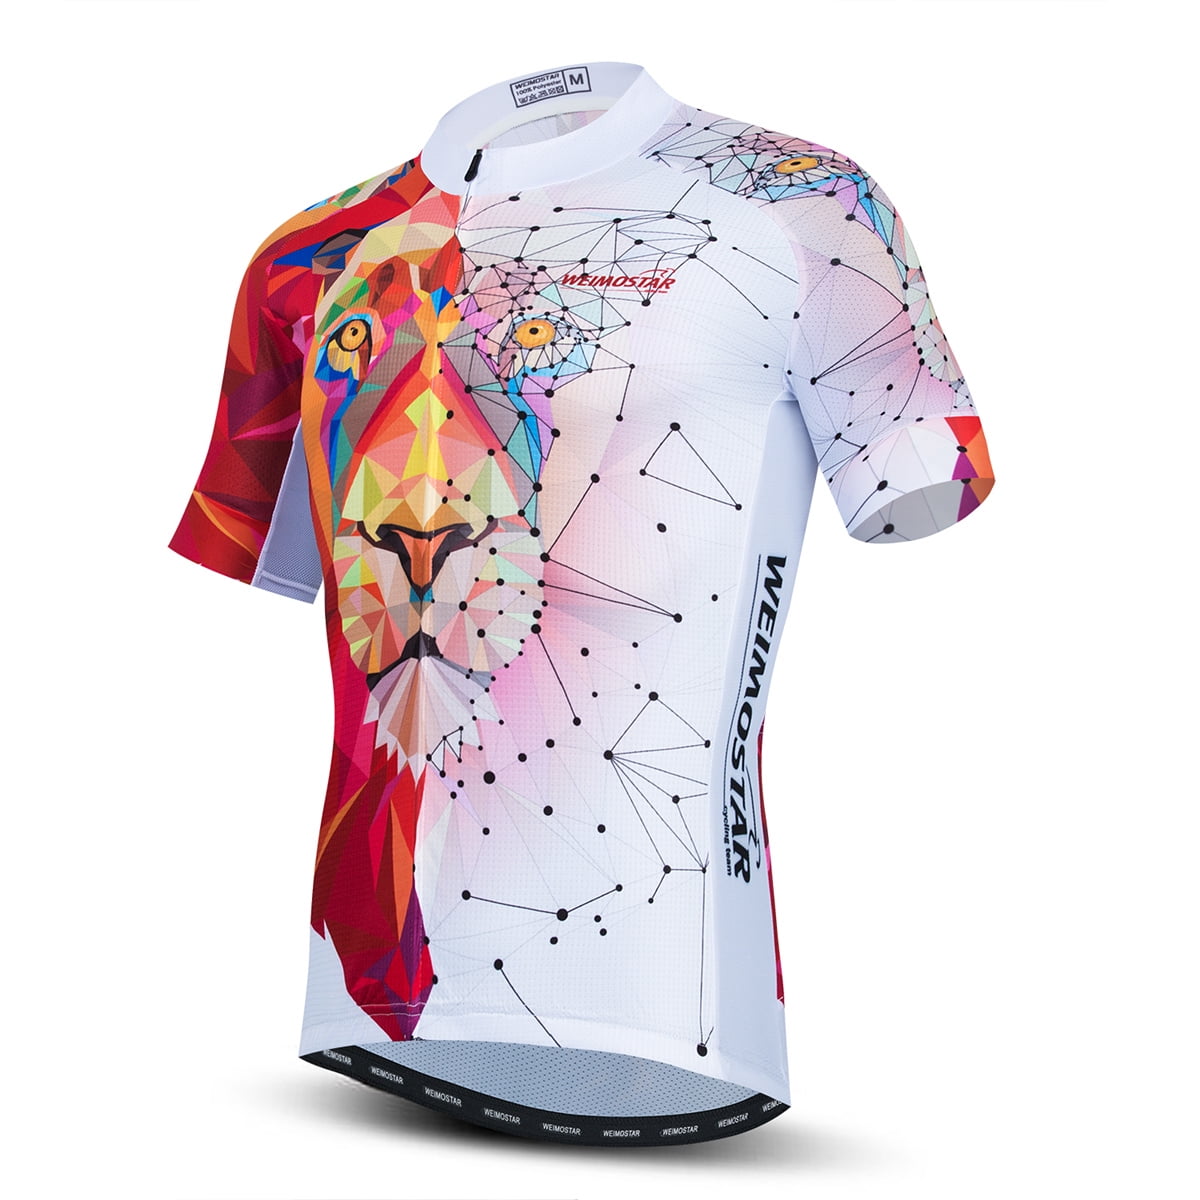 Weimostar Summer Short Sleeve Cycling Jersey Women Mountain Bicycle Clothing Racing Bike Clothes Quick Dry